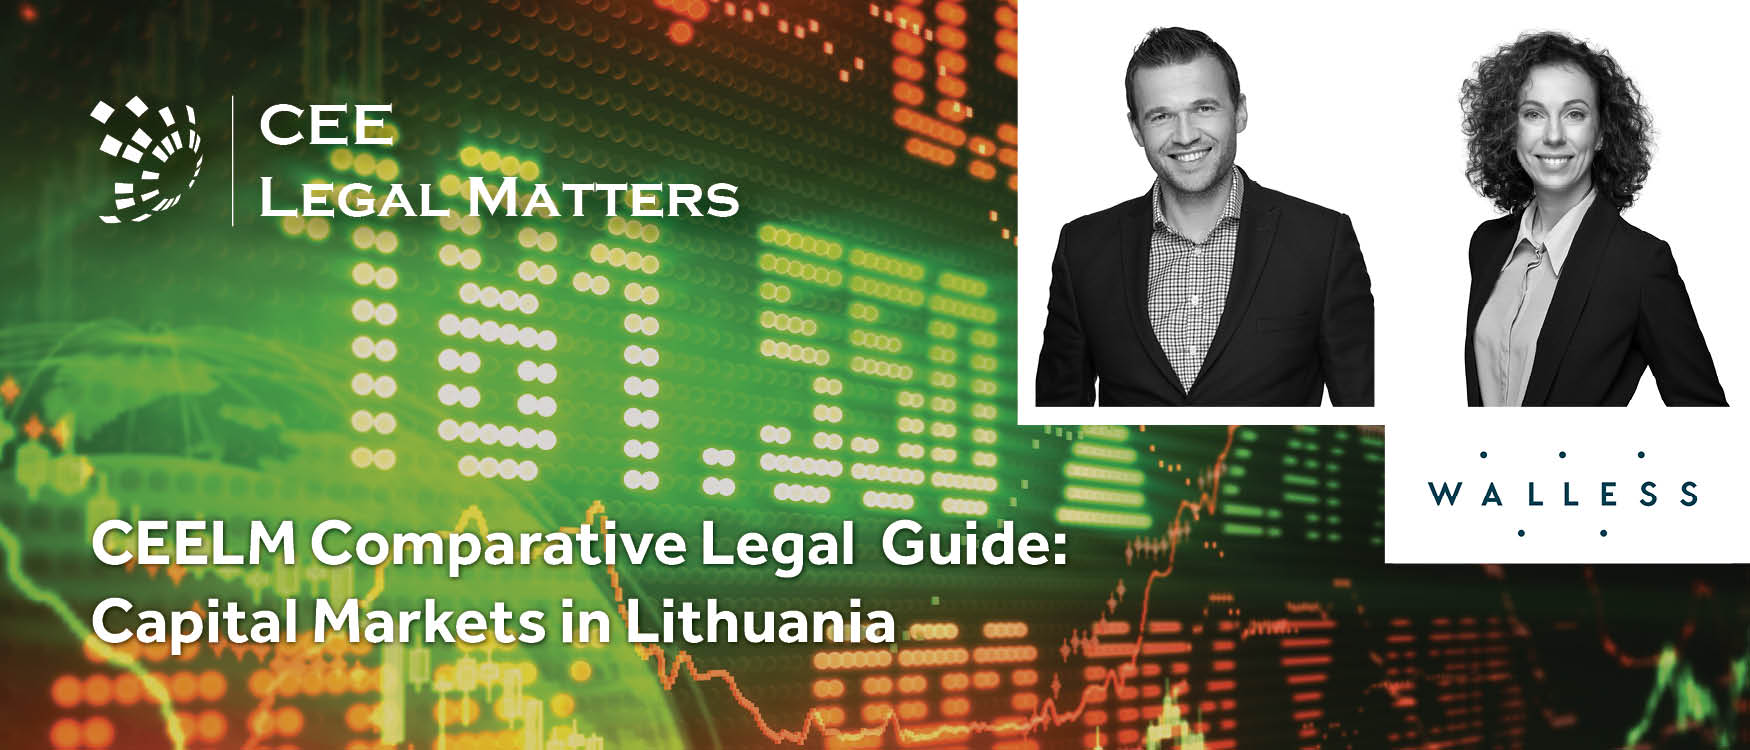 Capital Markets in Lithuania